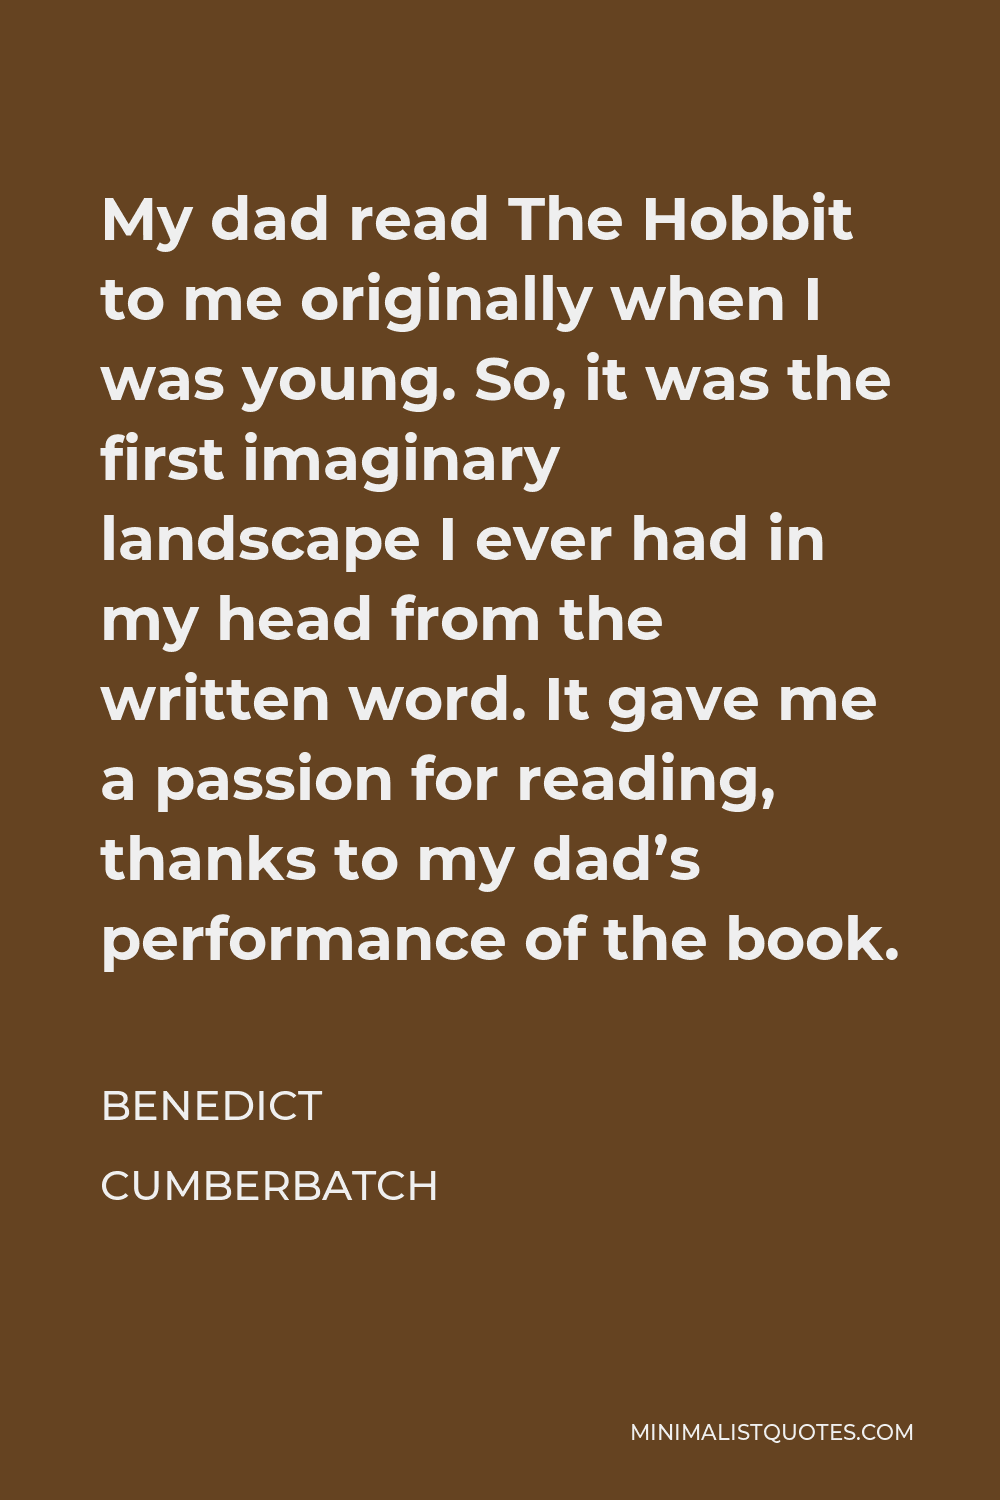 Benedict Cumberbatch Quote - My dad read The Hobbit to me originally when I was young. So, it was the first imaginary landscape I ever had in my head from the written word. It gave me a passion for reading, thanks to my dad’s performance of the book.